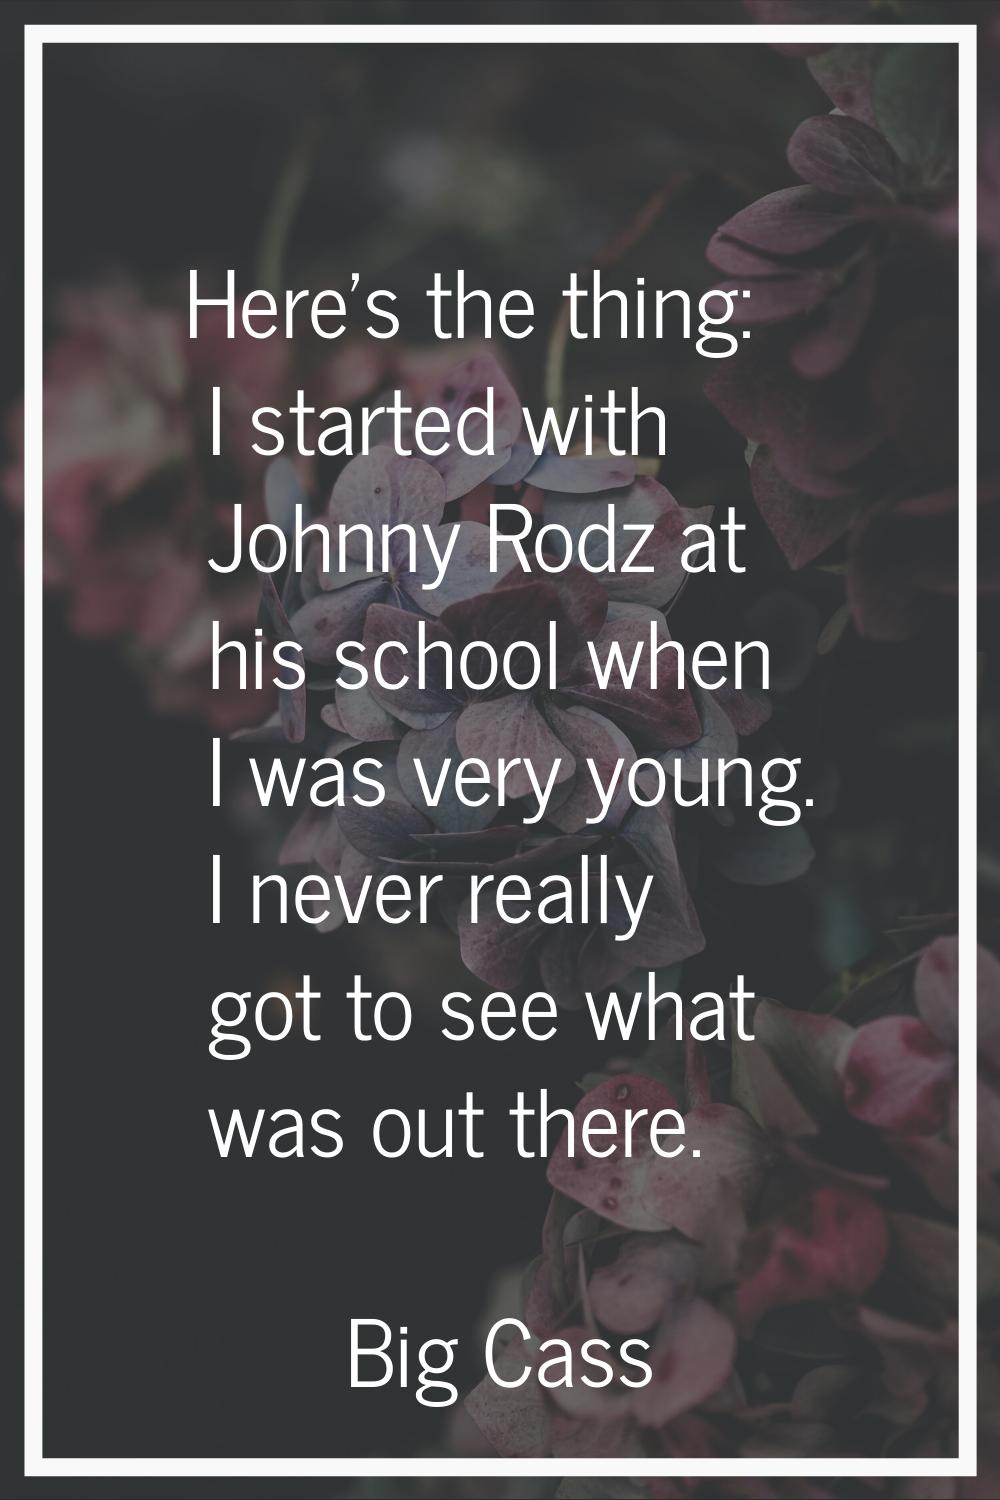 Here's the thing: I started with Johnny Rodz at his school when I was very young. I never really go